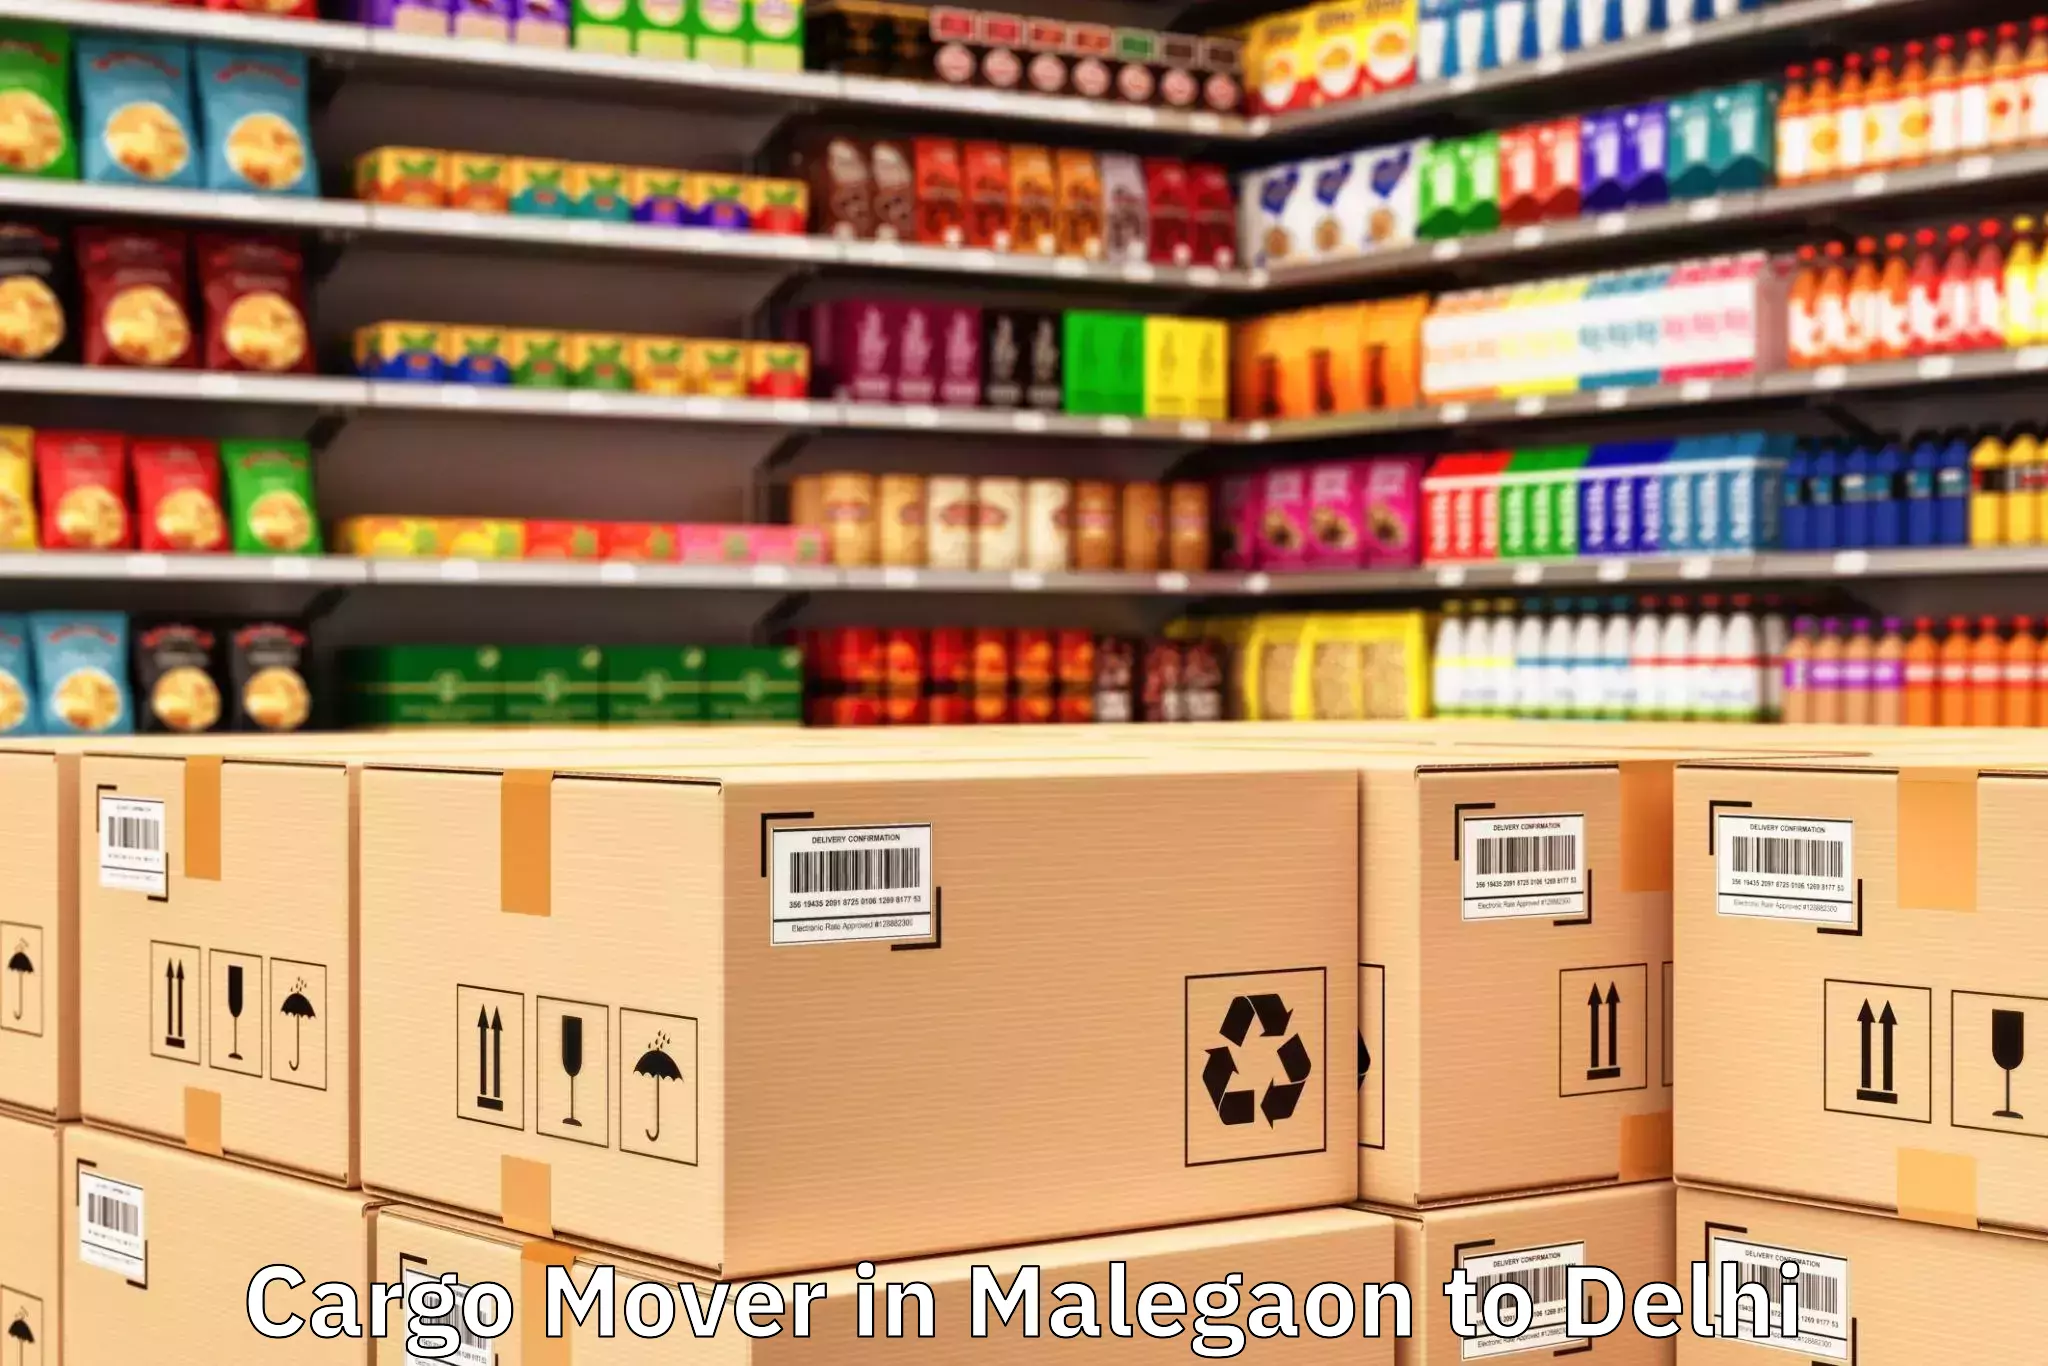 Quality Malegaon to Tdi Paragon Mall Cargo Mover